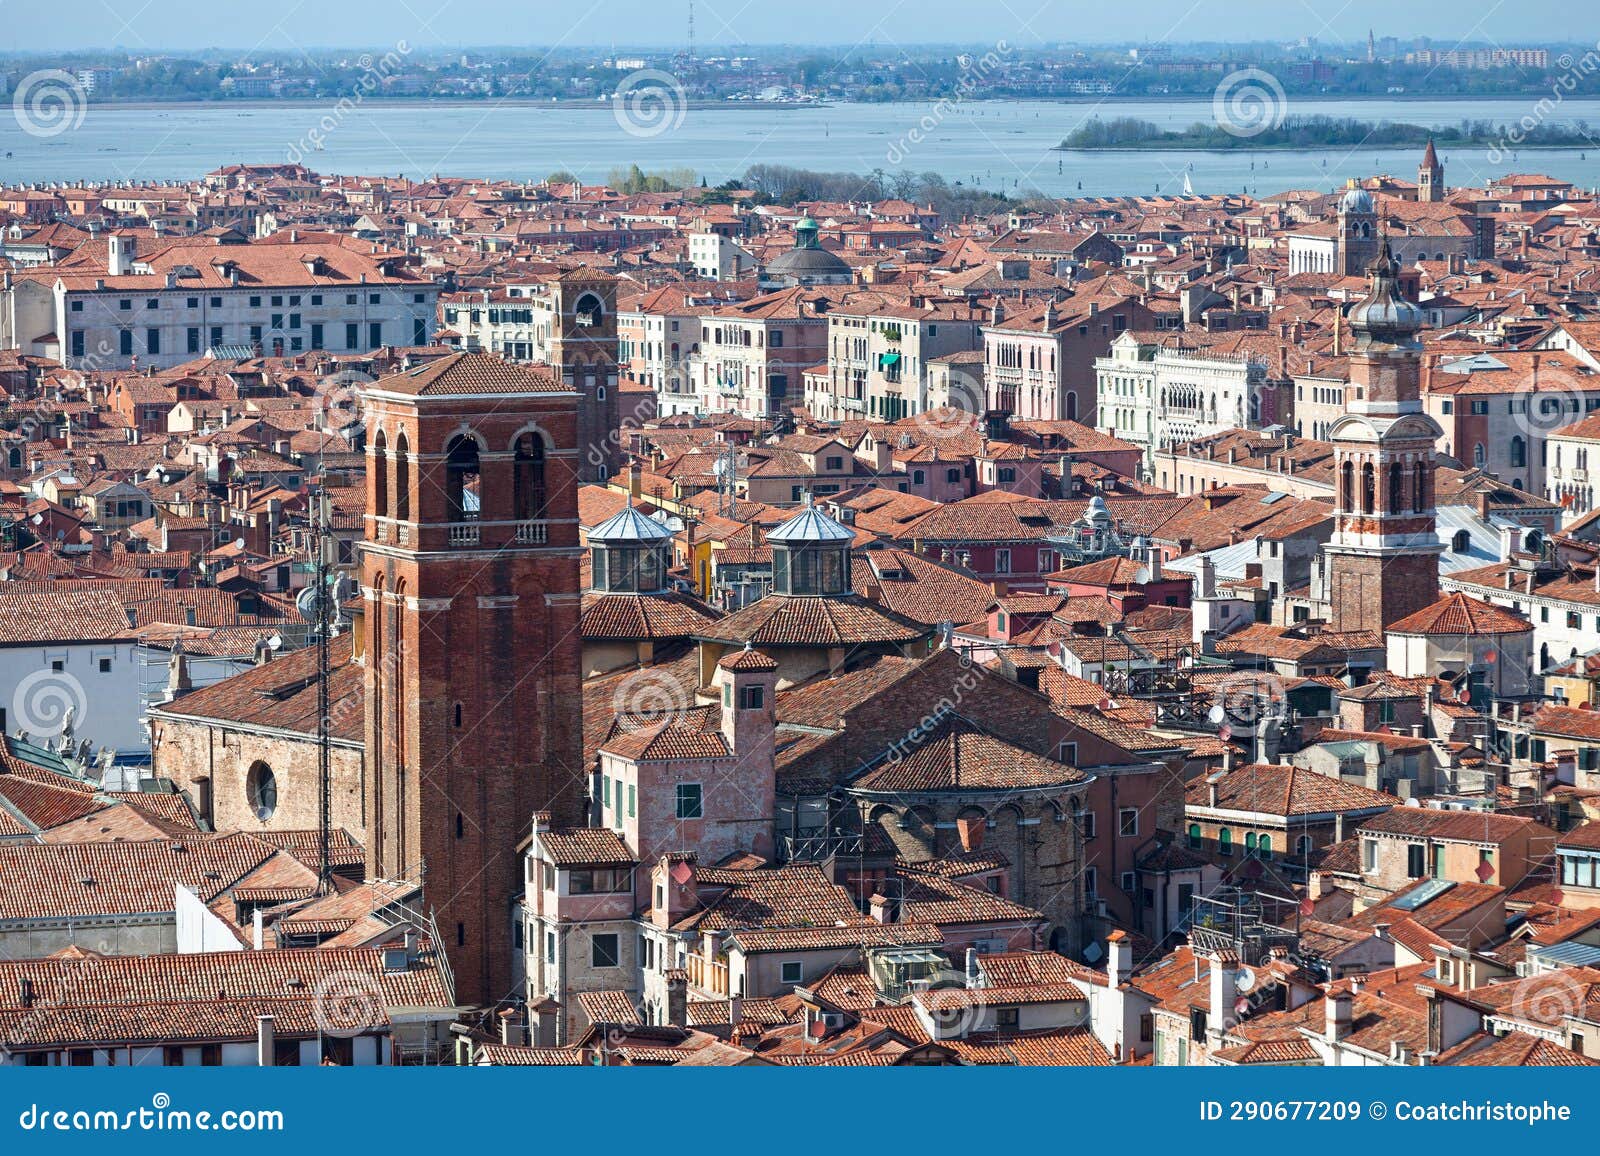 aerial view of the church of san salvatoree in venice